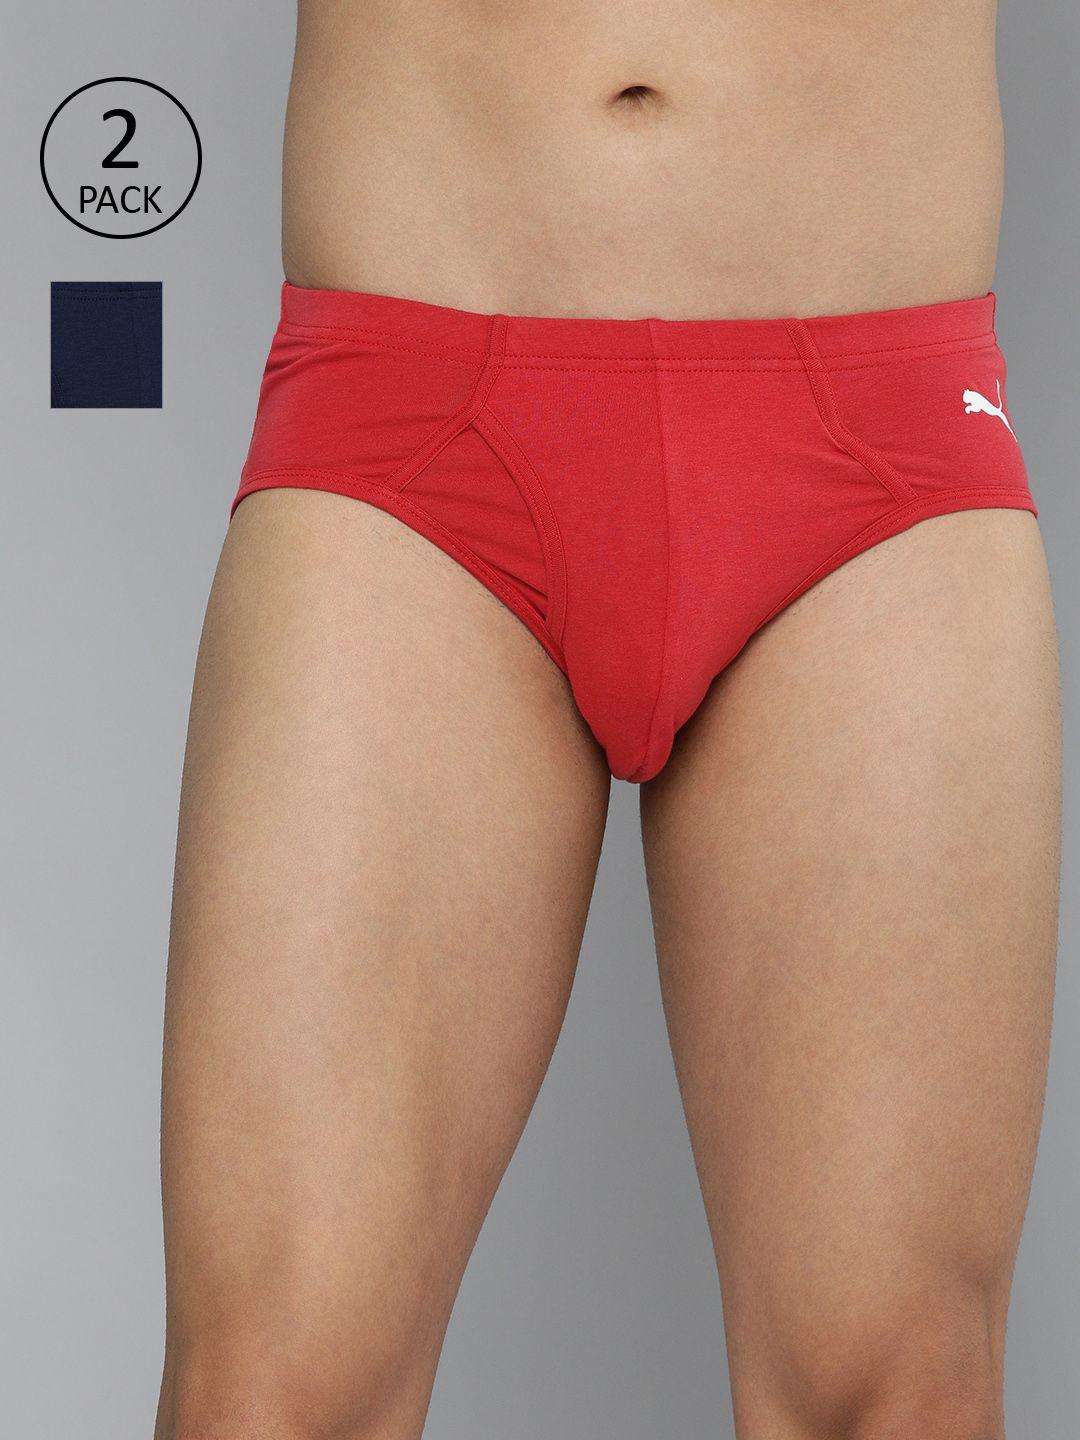 puma men pack of 2 red & navy blue solid stretch briefs 93210202